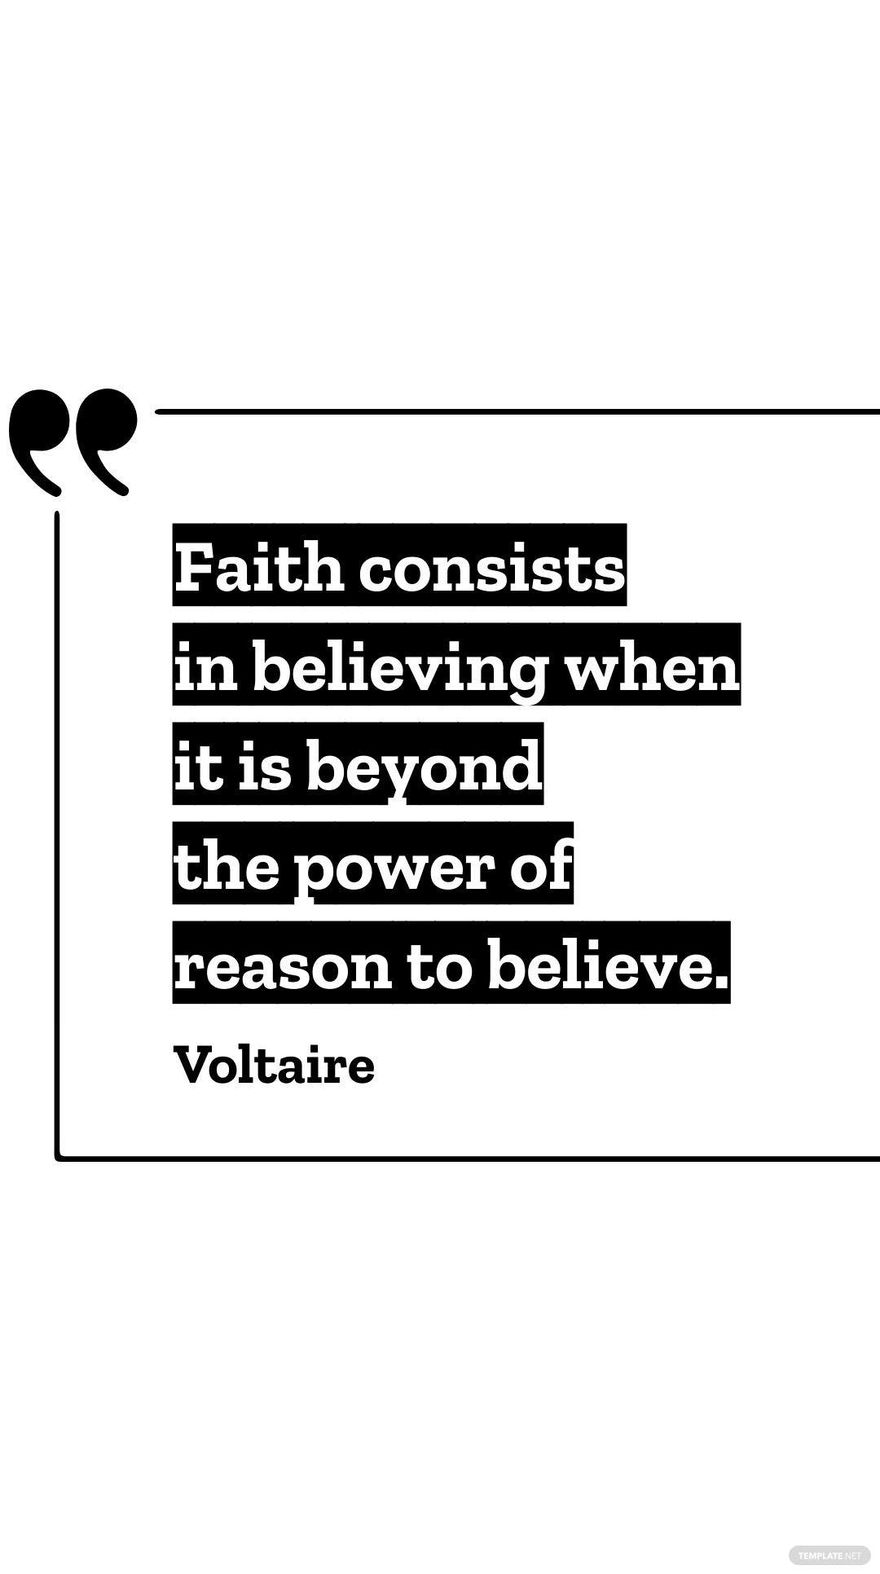 Free Voltaire - Faith consists in believing when it is beyond the power of reason to believe. in JPG